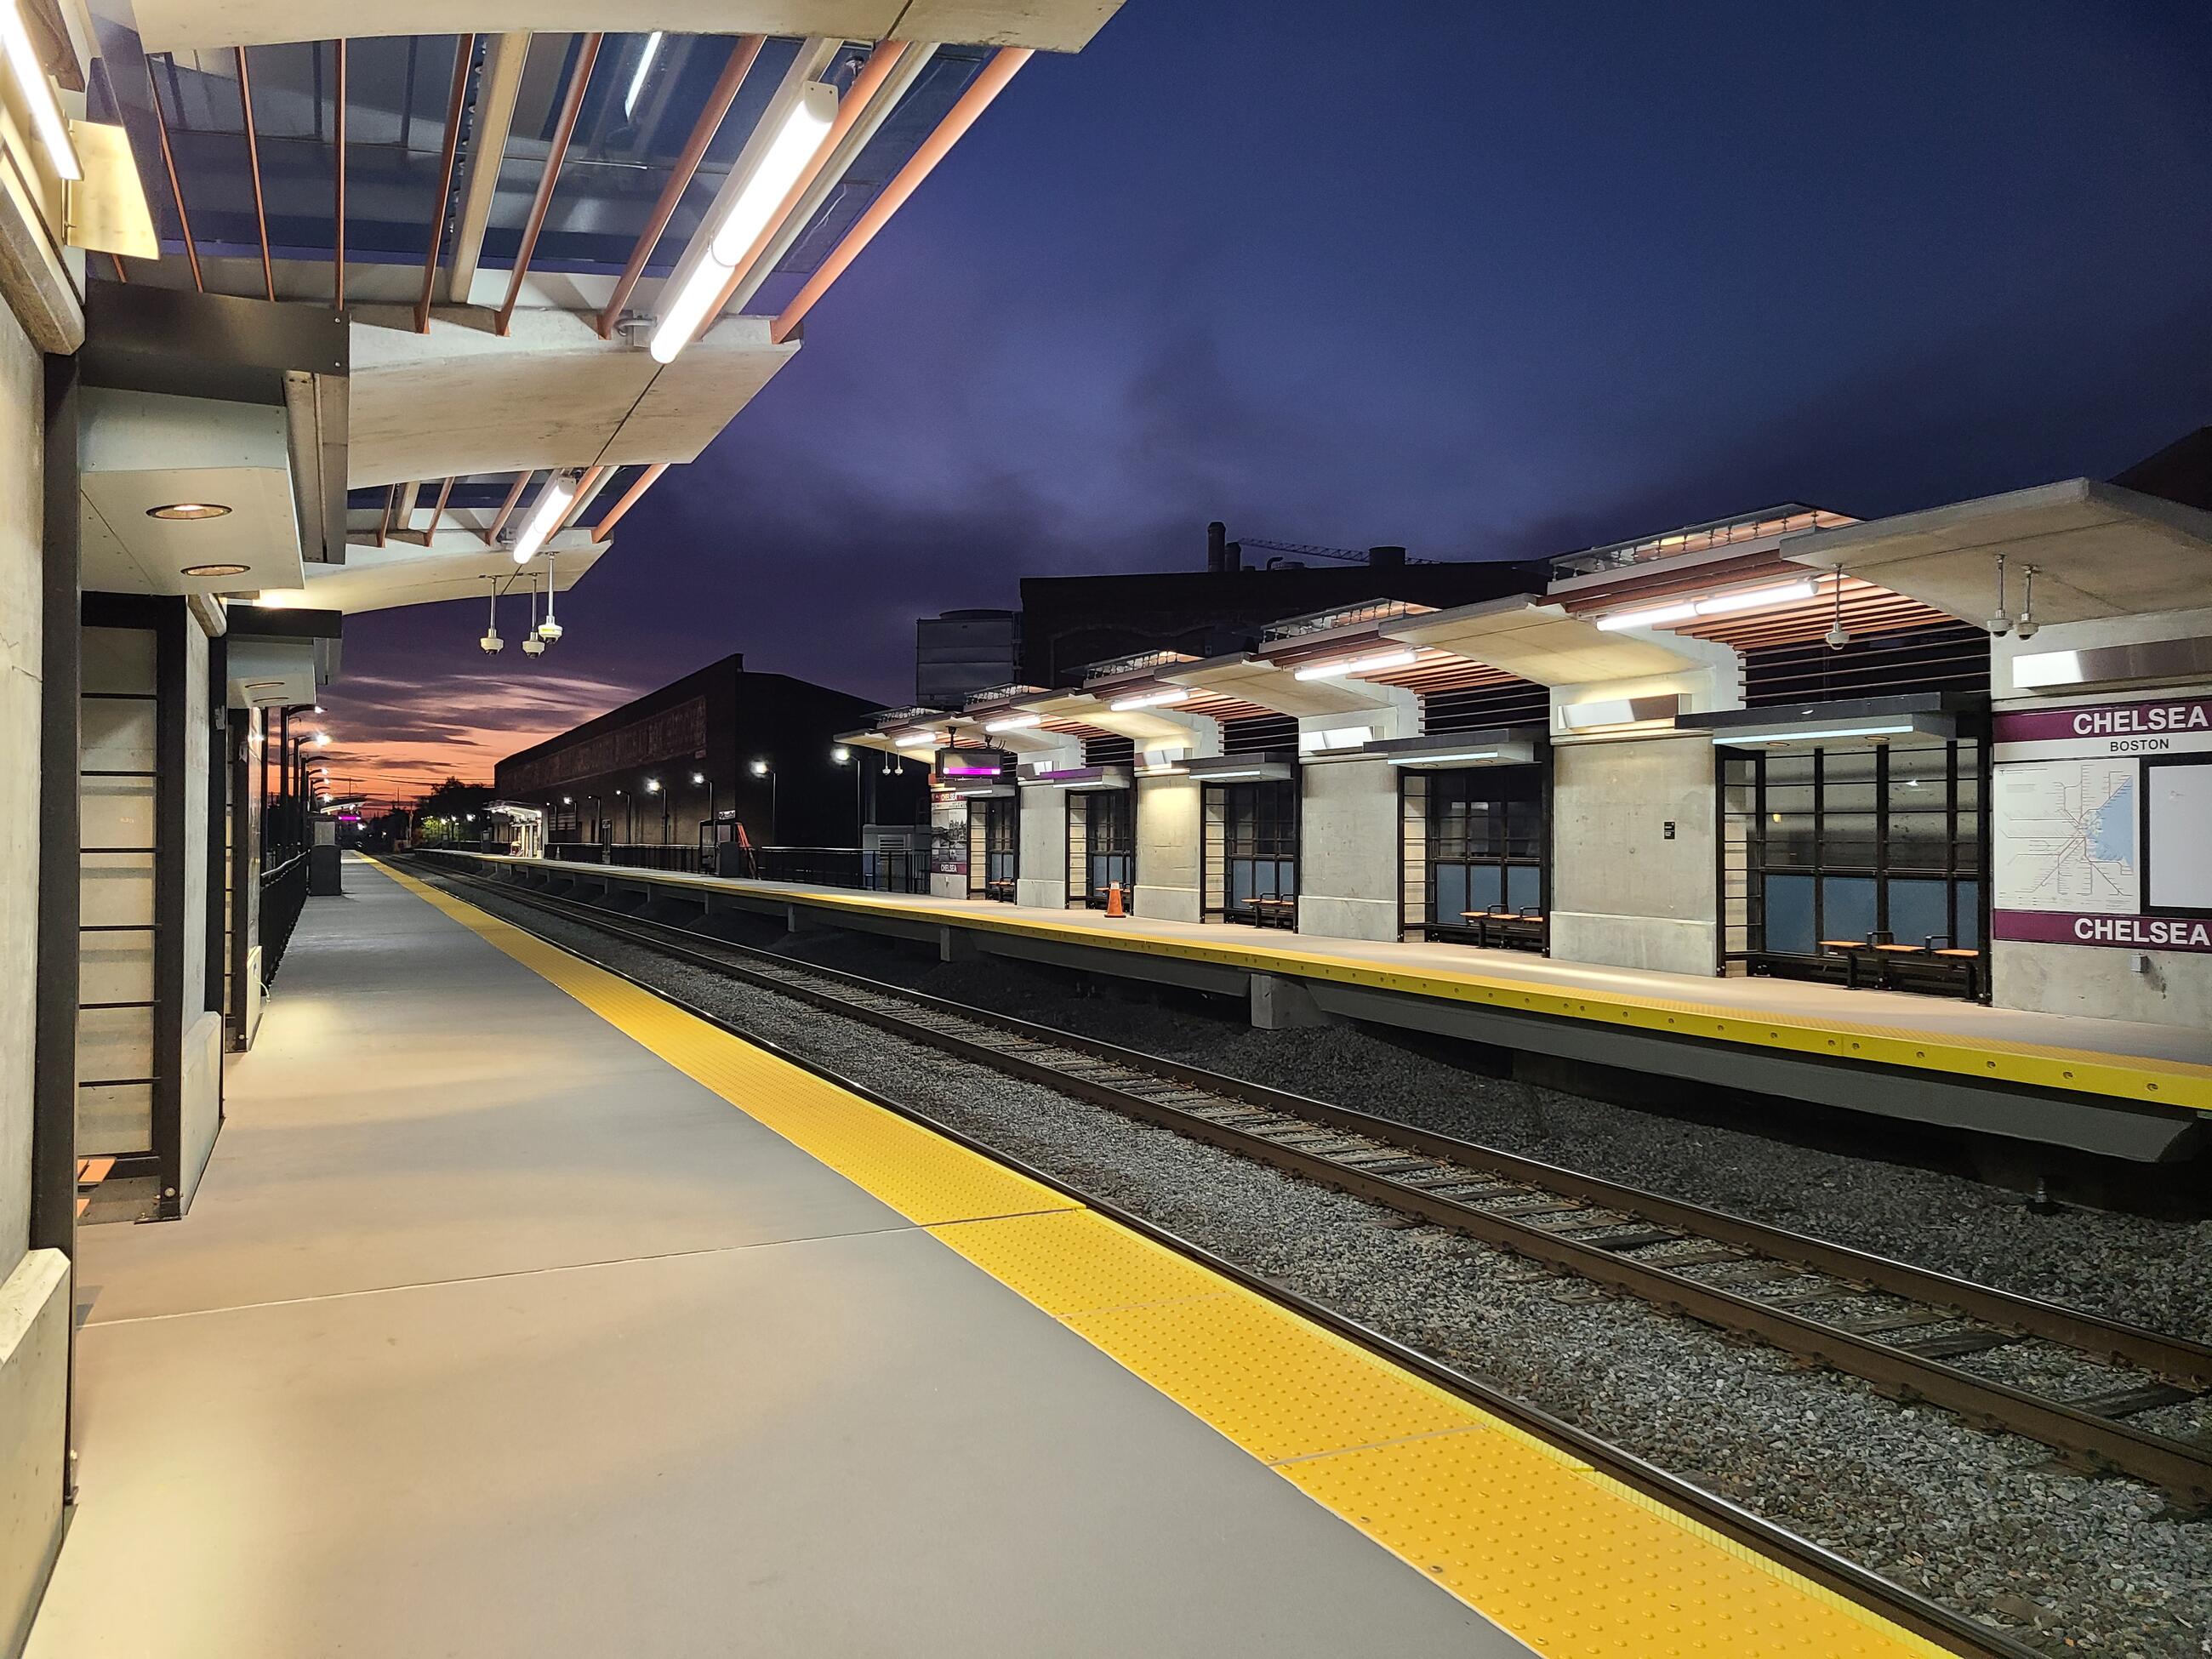 The new Chelsea Commuter Rail station is shown at dusk. The overhead lights that hang from the clear canopies over the platform are on. They illuminate the platforms at the left and right sides of the image, with the empty track running down the middle. The large Chelsea Station sign and map are shown along the right platform, and there are benches in the recessed lighted areas under the canopies. 